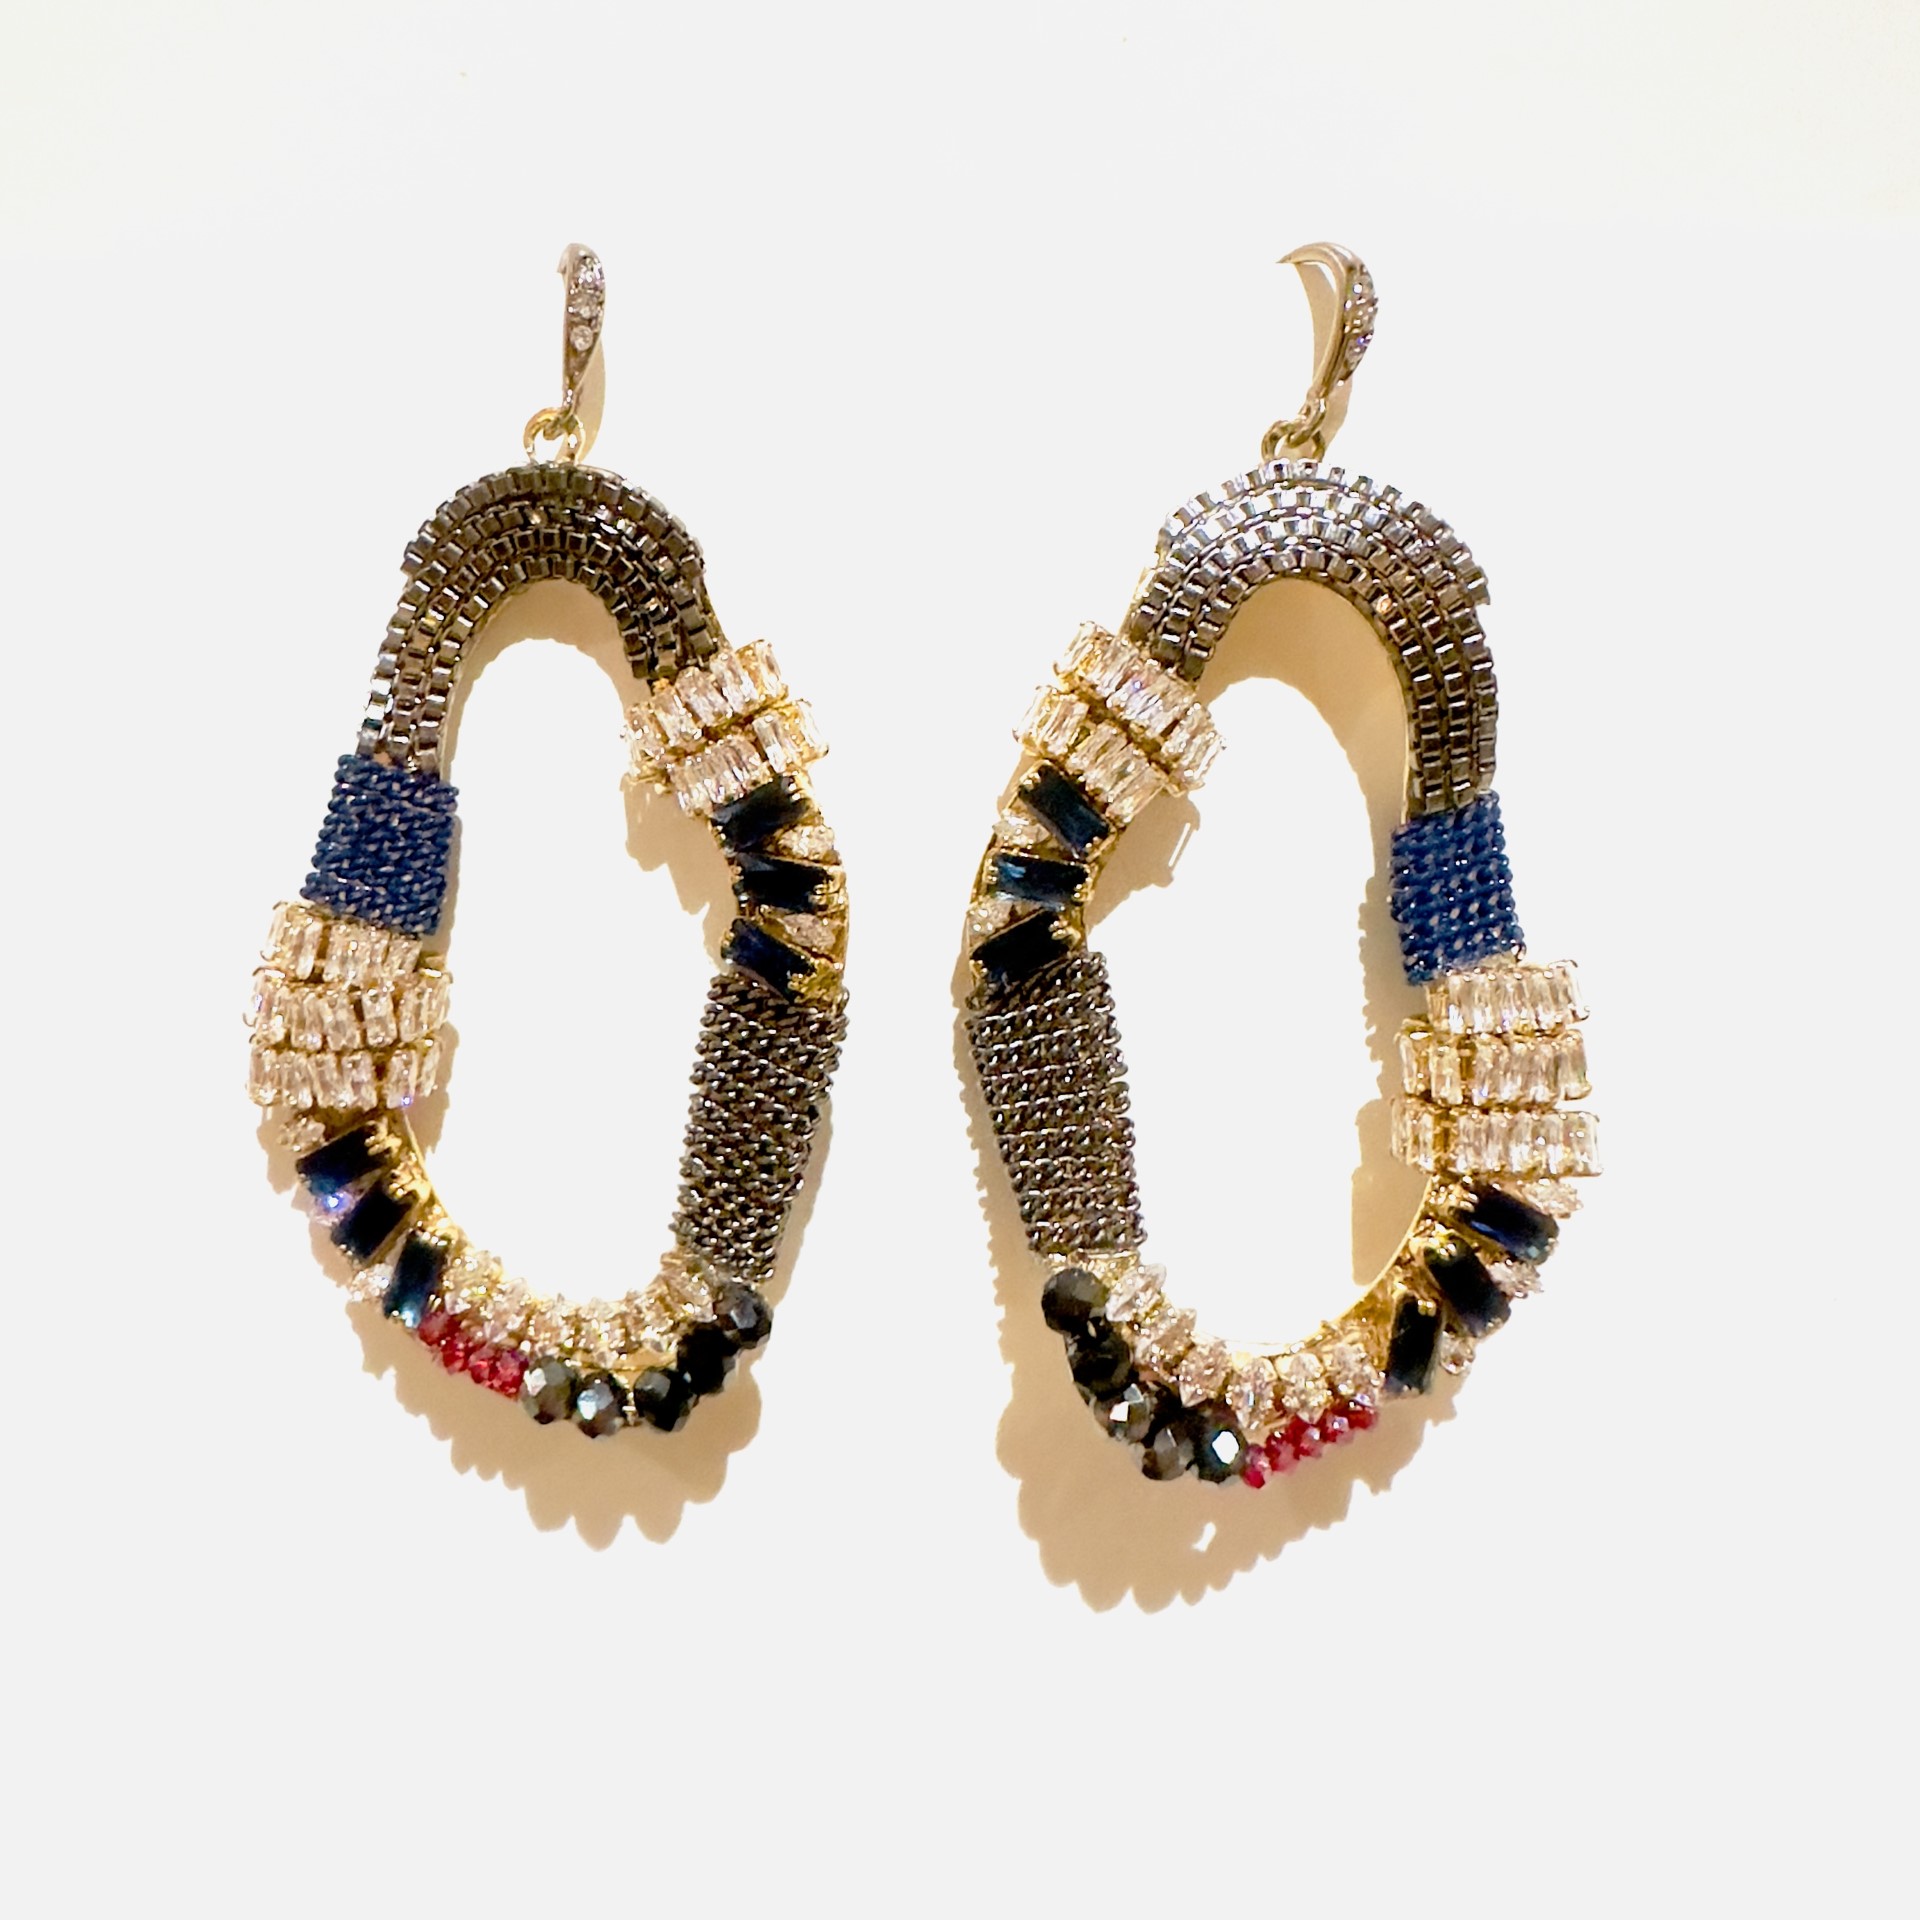 A pair of E5018 (Holiday) earrings with multi colored beads.